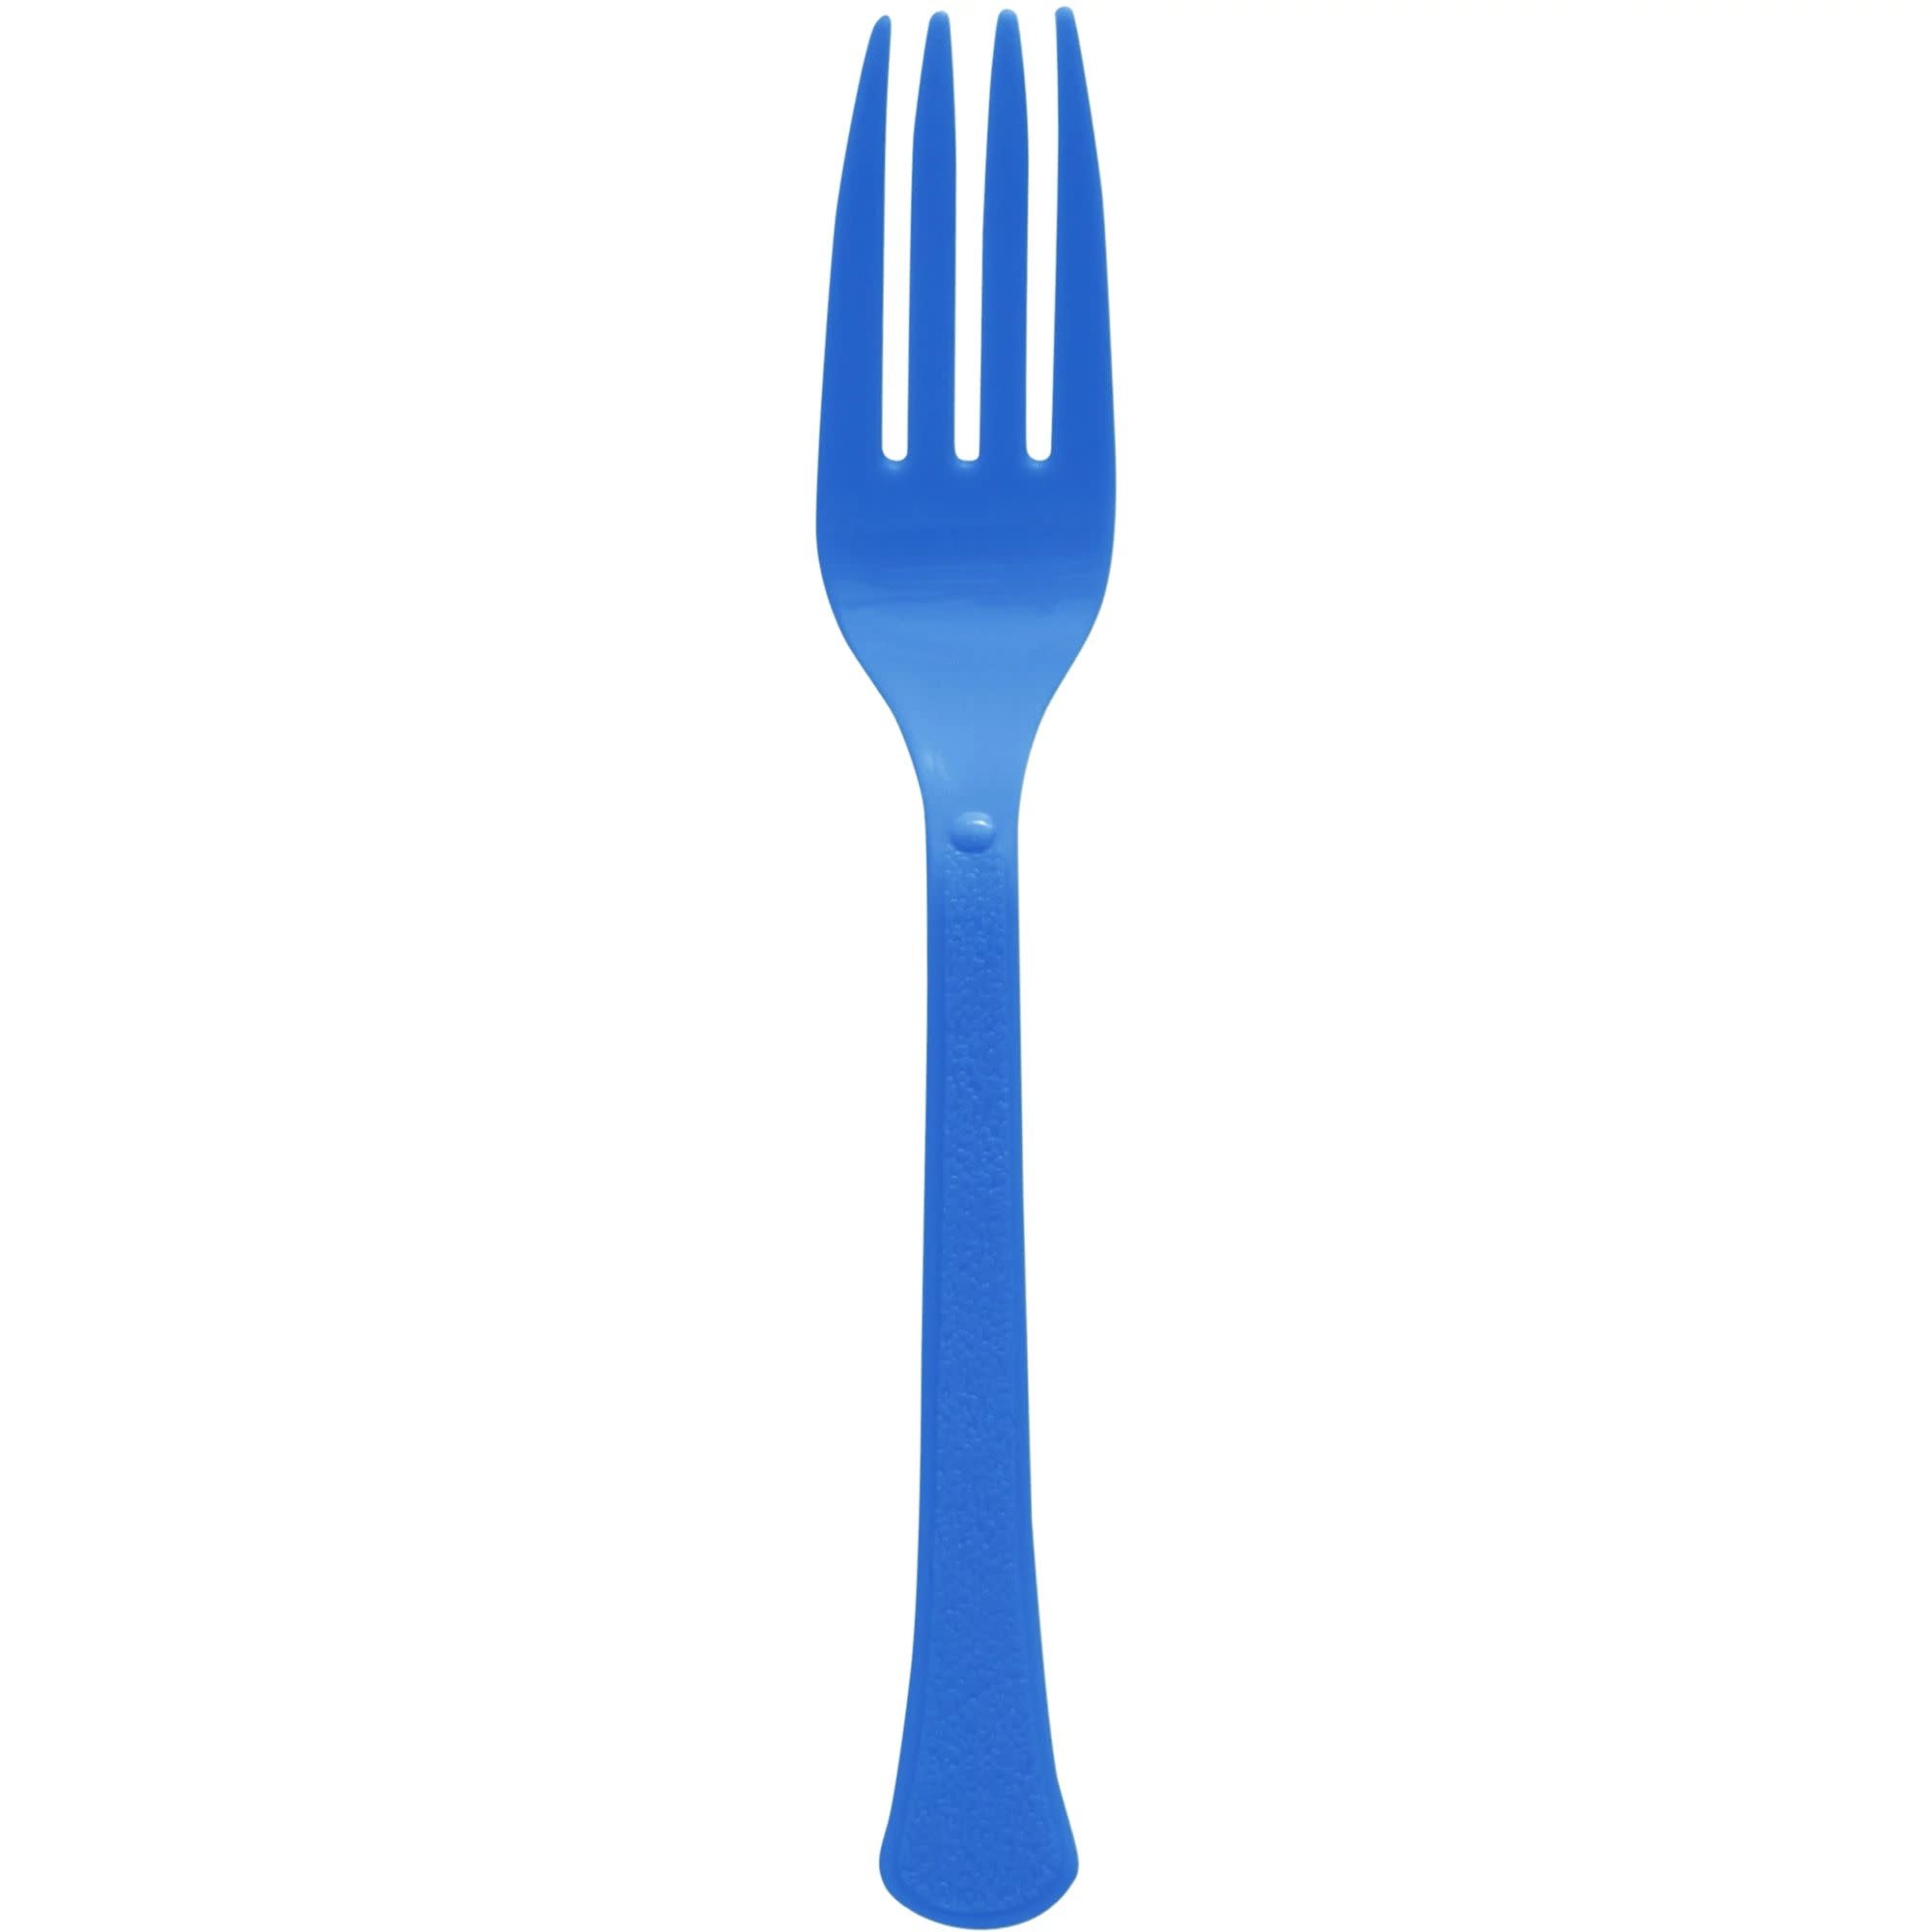 Boxed, Heavy Weight Forks, High Ct. - Bright Royal Blue (50 Count)